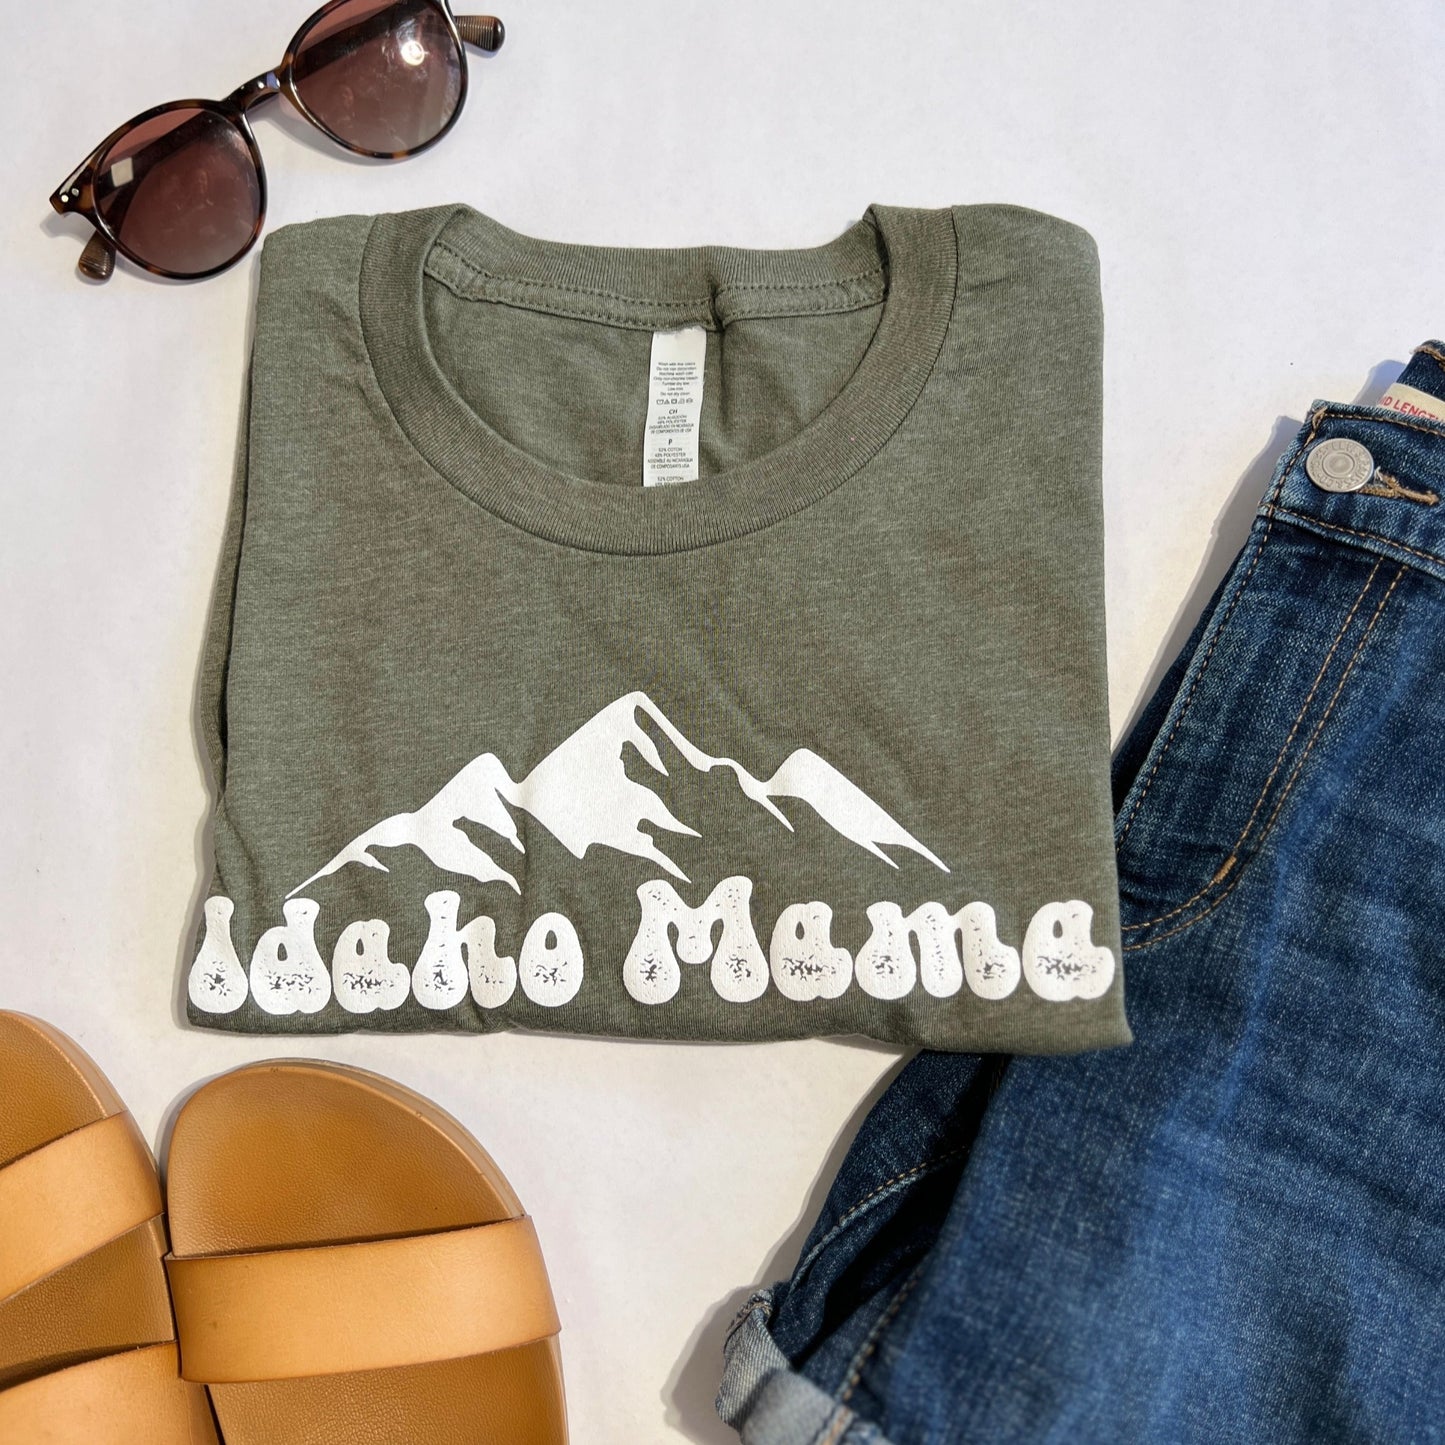 Idaho Mama T Shirt is a must if you live in Idaho. This Idaho T Shirt showcases the Idaho Mountains and has Idaho Mama on the front. Idaho Apparel Clothing Company operated in Idaho.